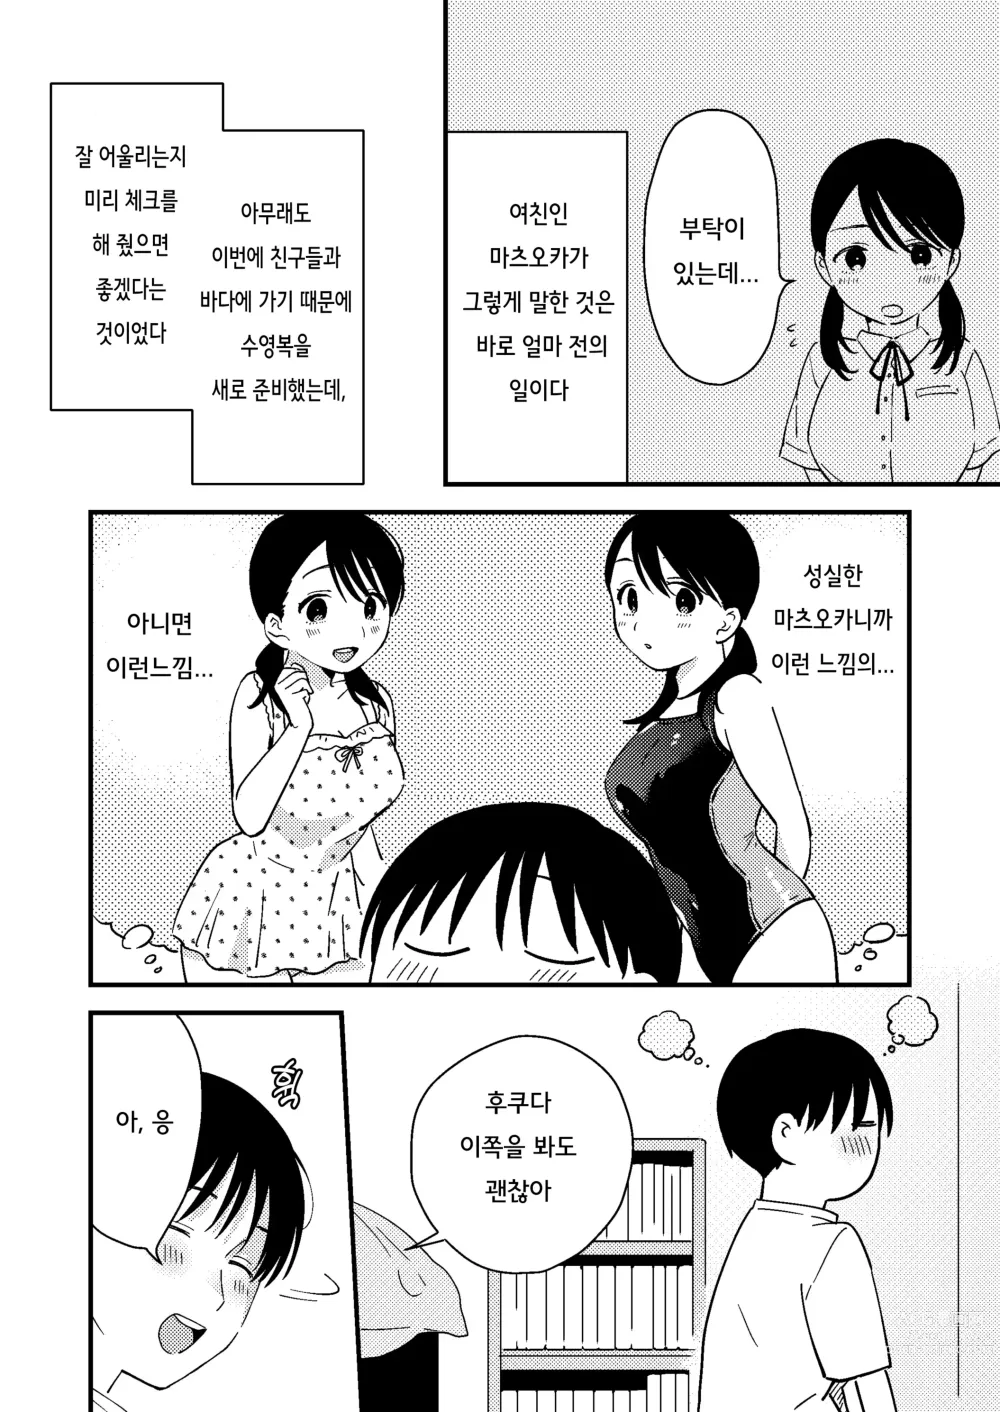 Page 4 of doujinshi 핑계 대는 여 자친구